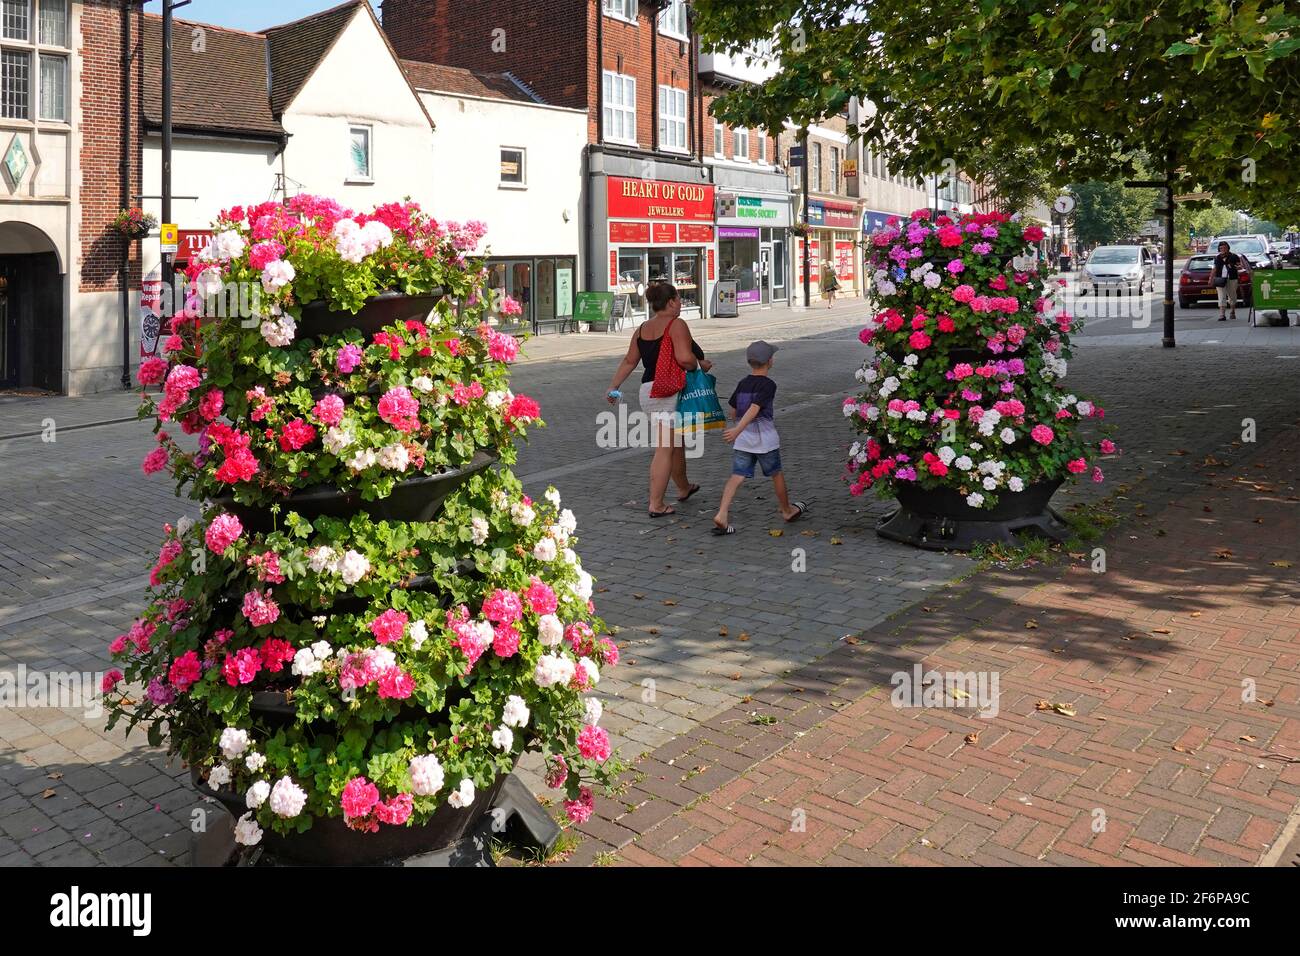 Mother holding Covid 19 coronavirus face mask in hand walking with young boy summer flowers in almost deserted Brentwood shopping High Street Essex UK Stock Photo